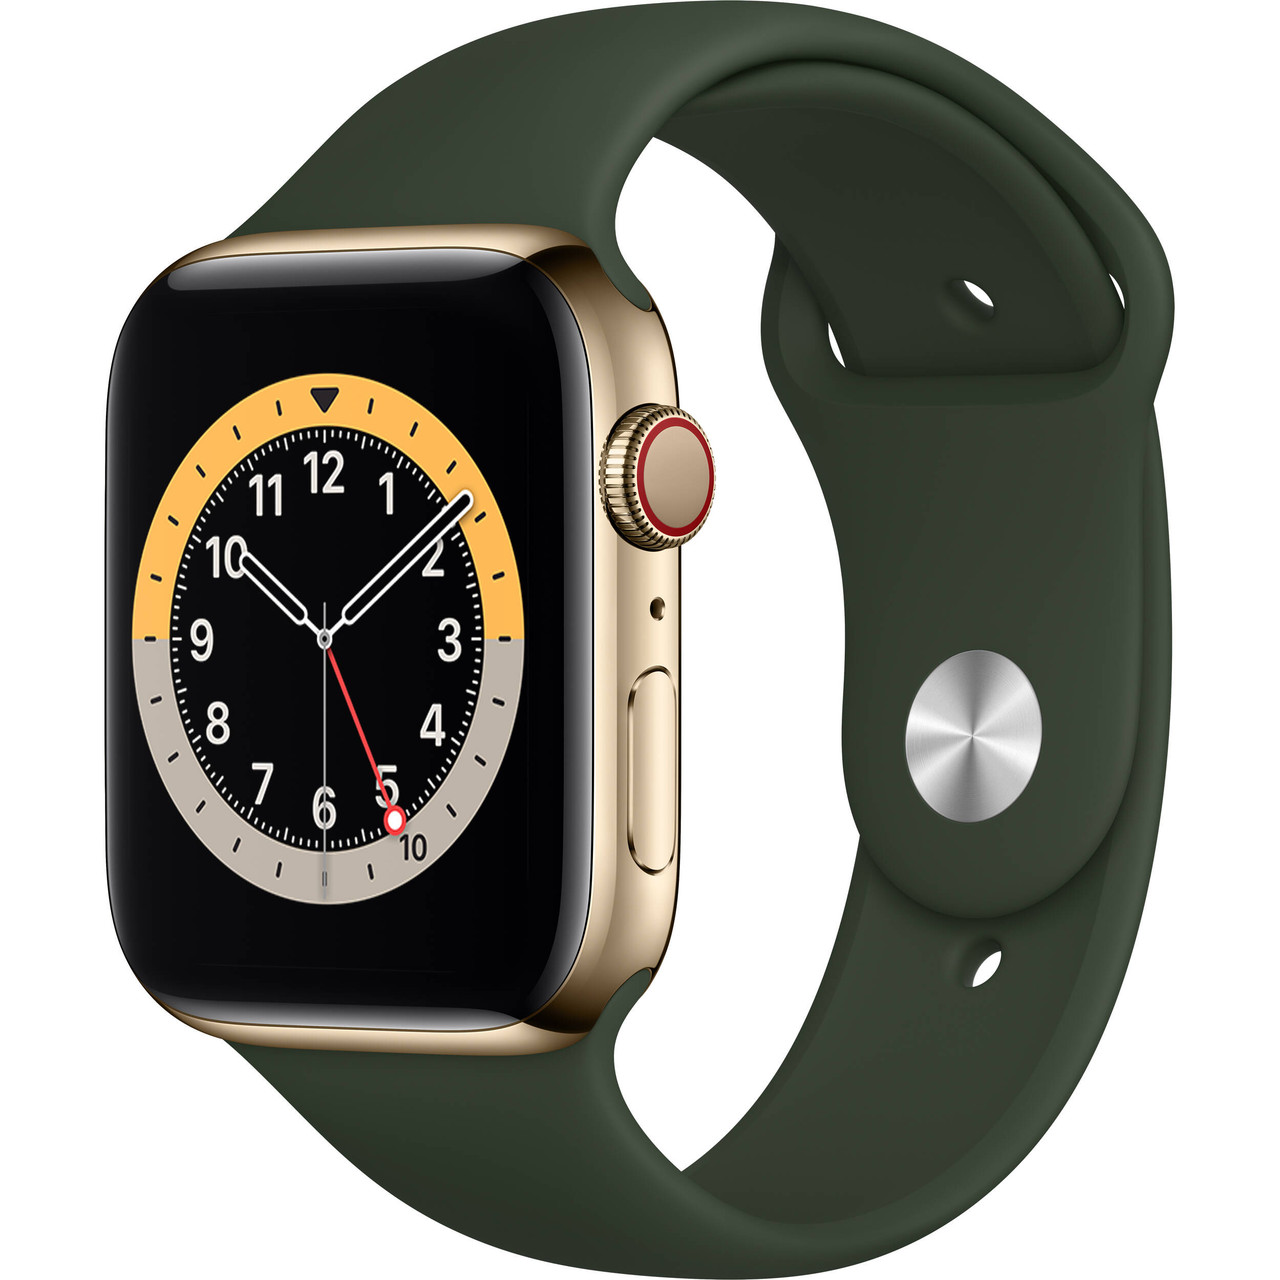 Apple Watch Series 6 (44 mm GPS + Cell) Gold SS Body Green Band - New